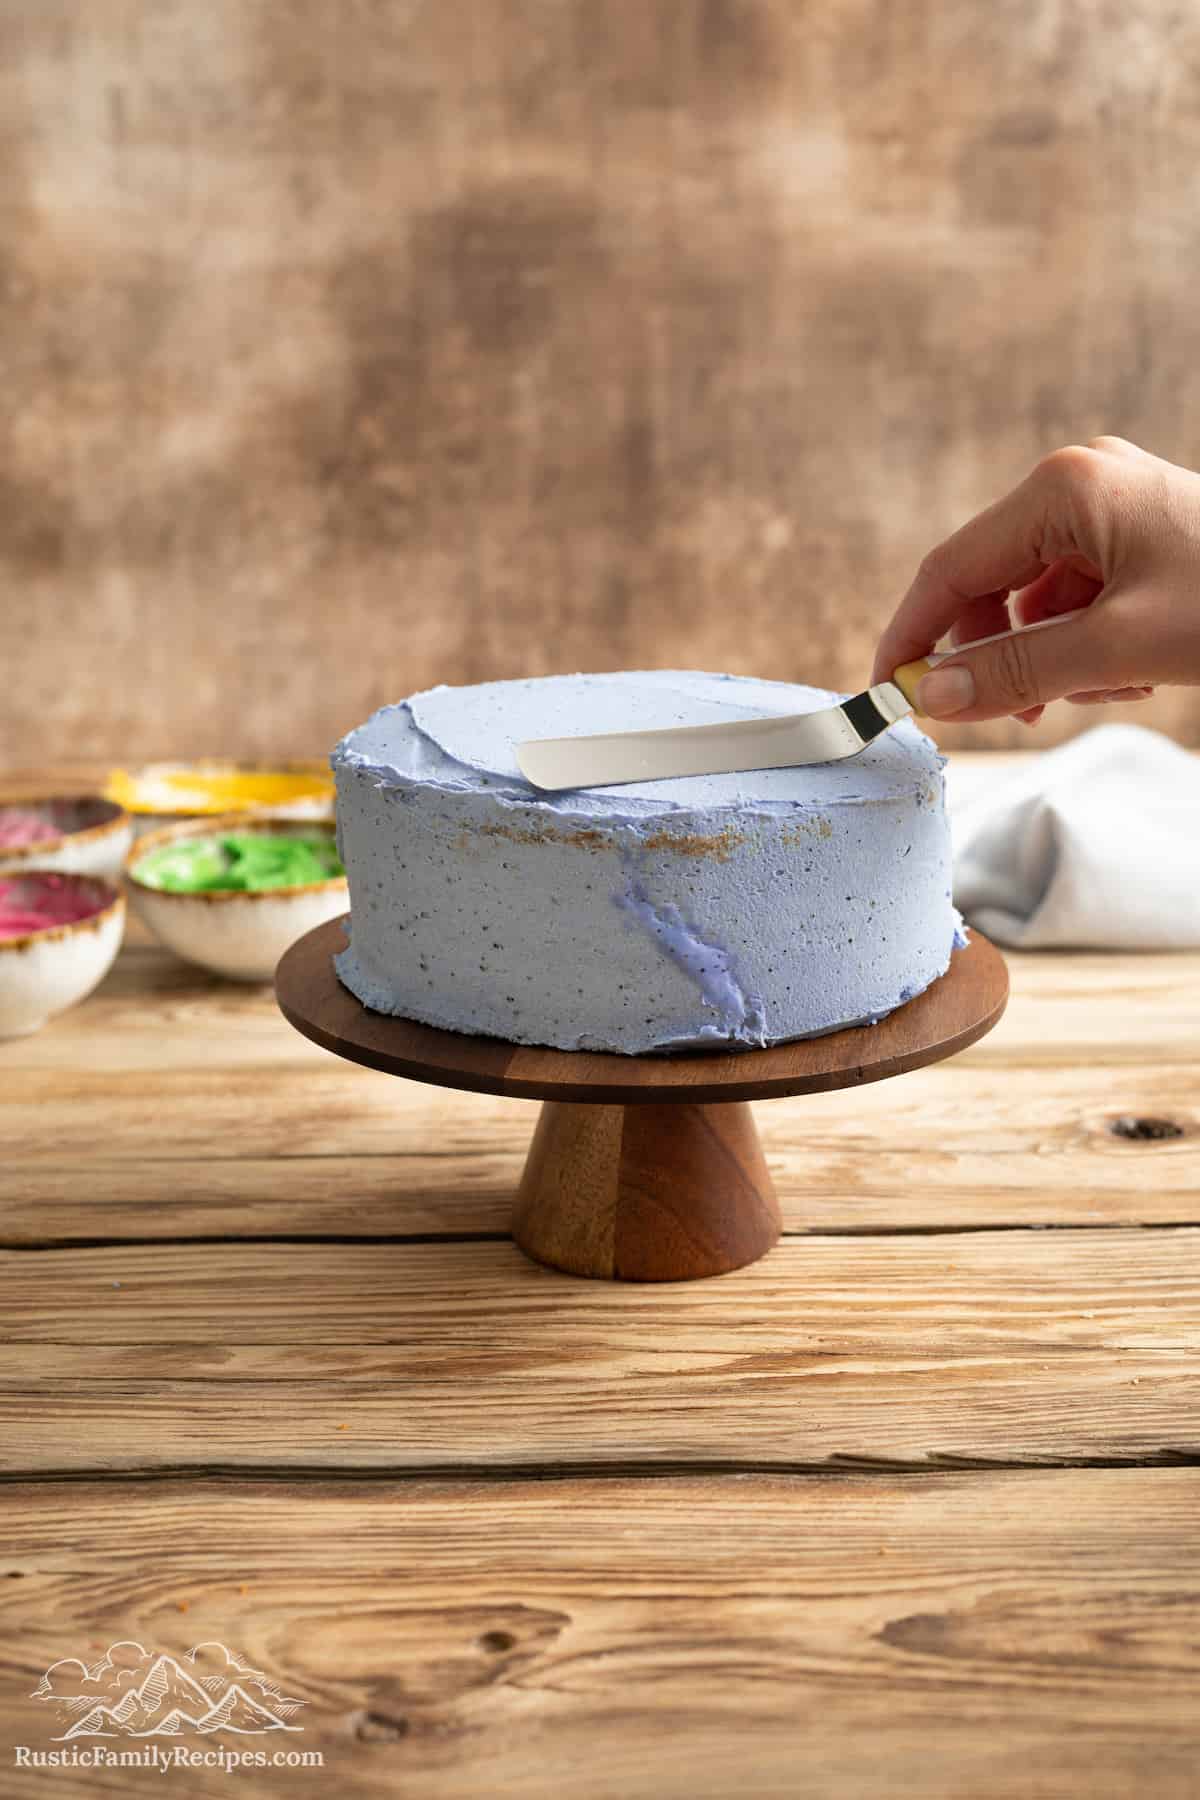 A hand uses an offset spatula to spread blue buttercream frosting over a double-layer cake.